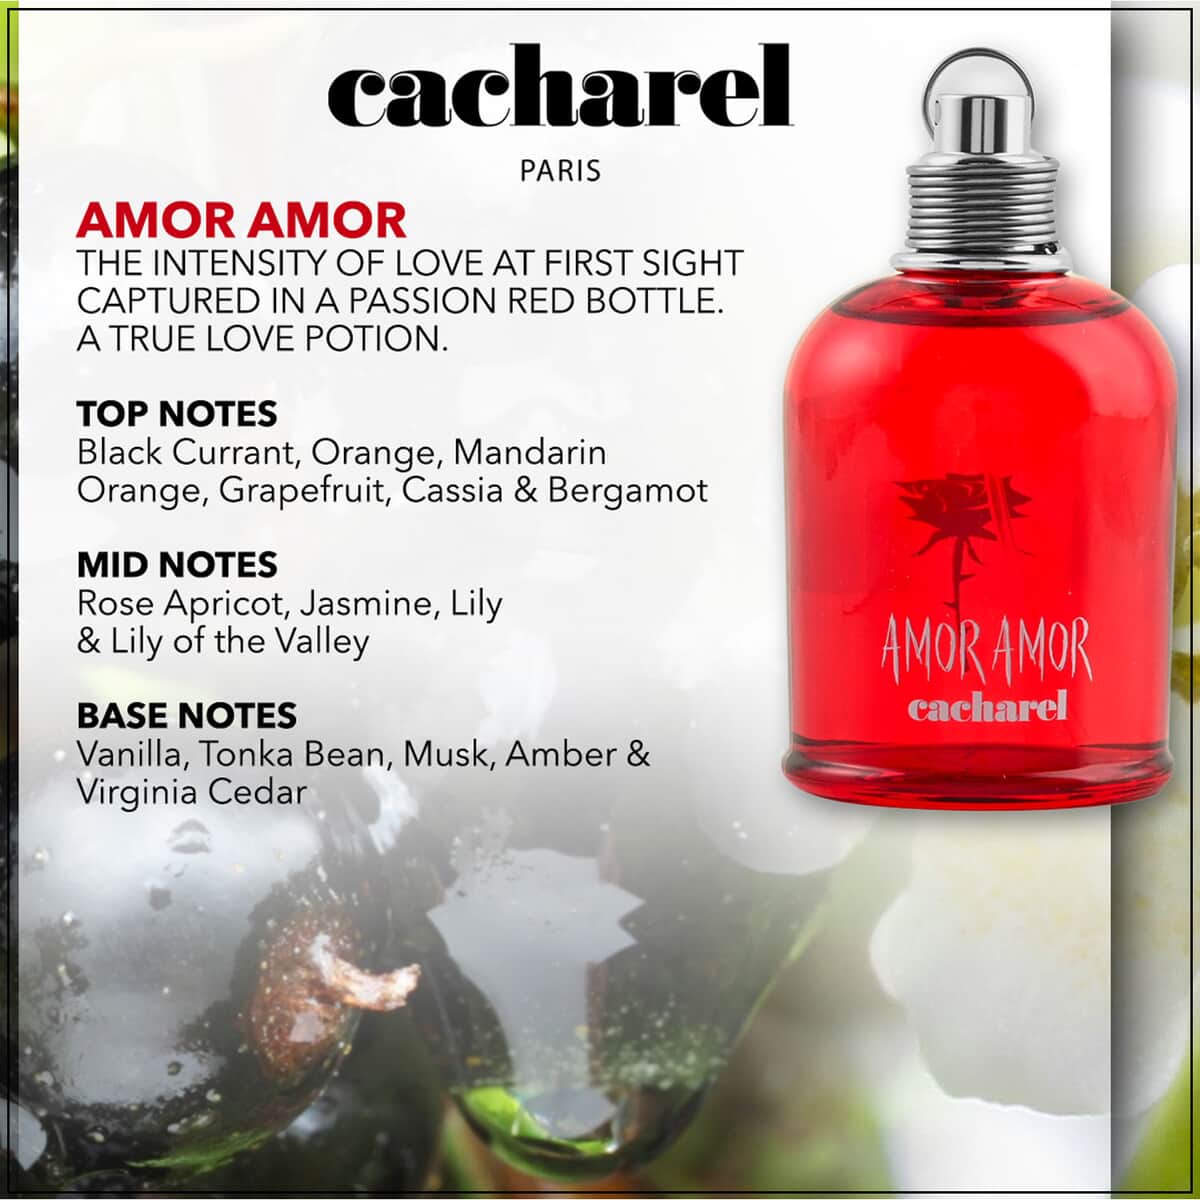 Buy Cacharel Amor Amor Eau De Toilette 3.4 oz with FREE Cosmetic Bag at